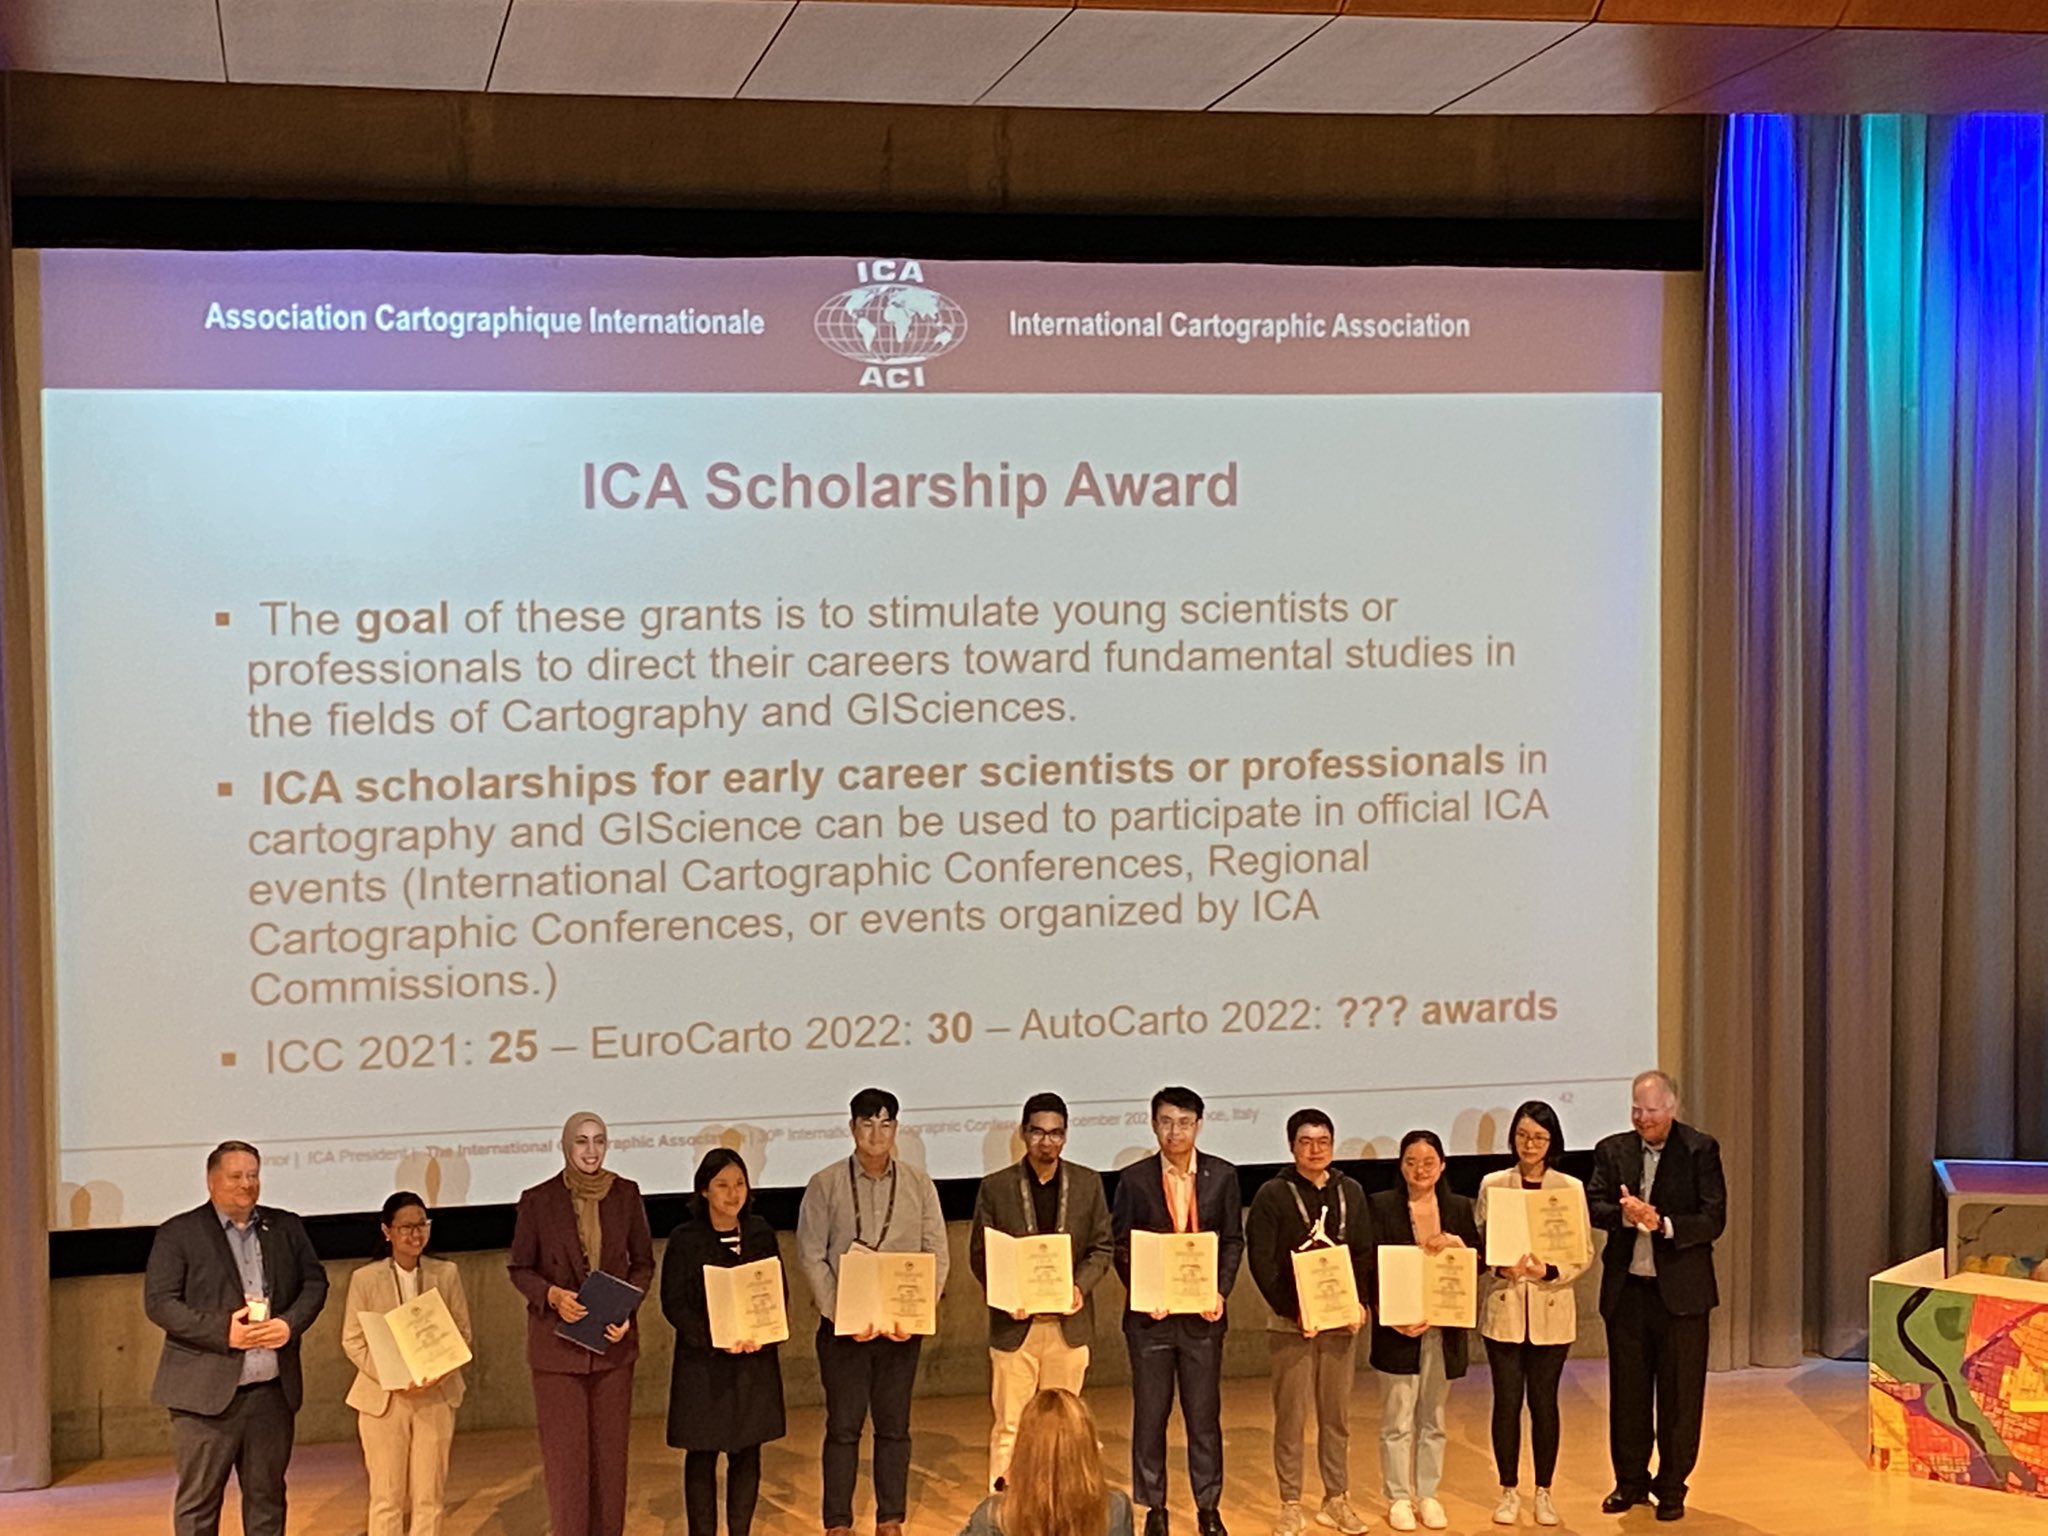 Winners of the ICA Scholarship Award stand in front of a stage to be honored for the achievement